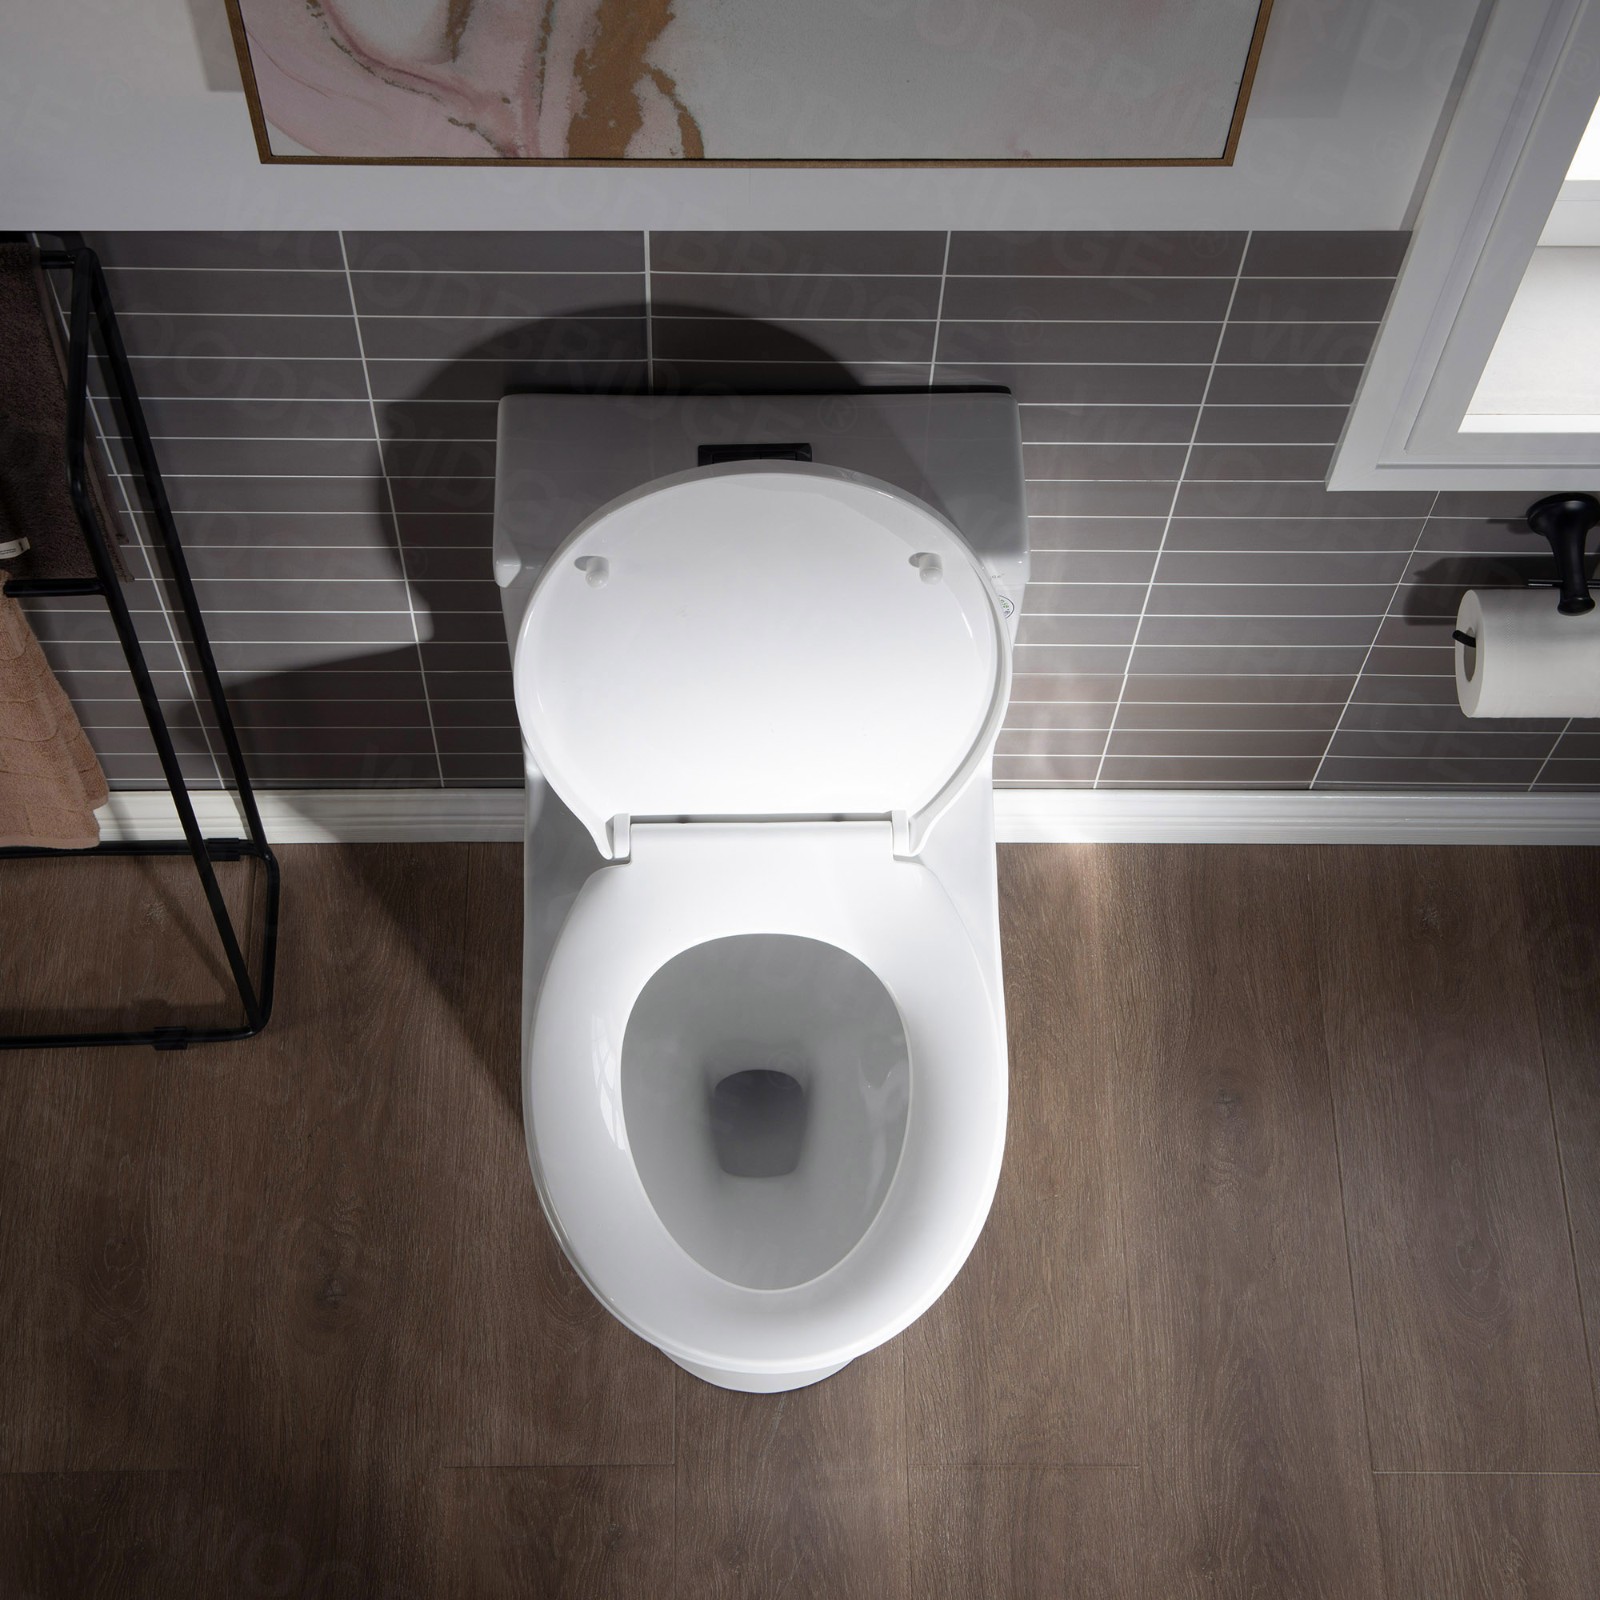  WOODBRIDGE One Piece Short Compact Bathroom Tiny Mini Commode Water Closet Dual Flush Concealed Trapway, Matte Black Button B0500-MB, White_7617